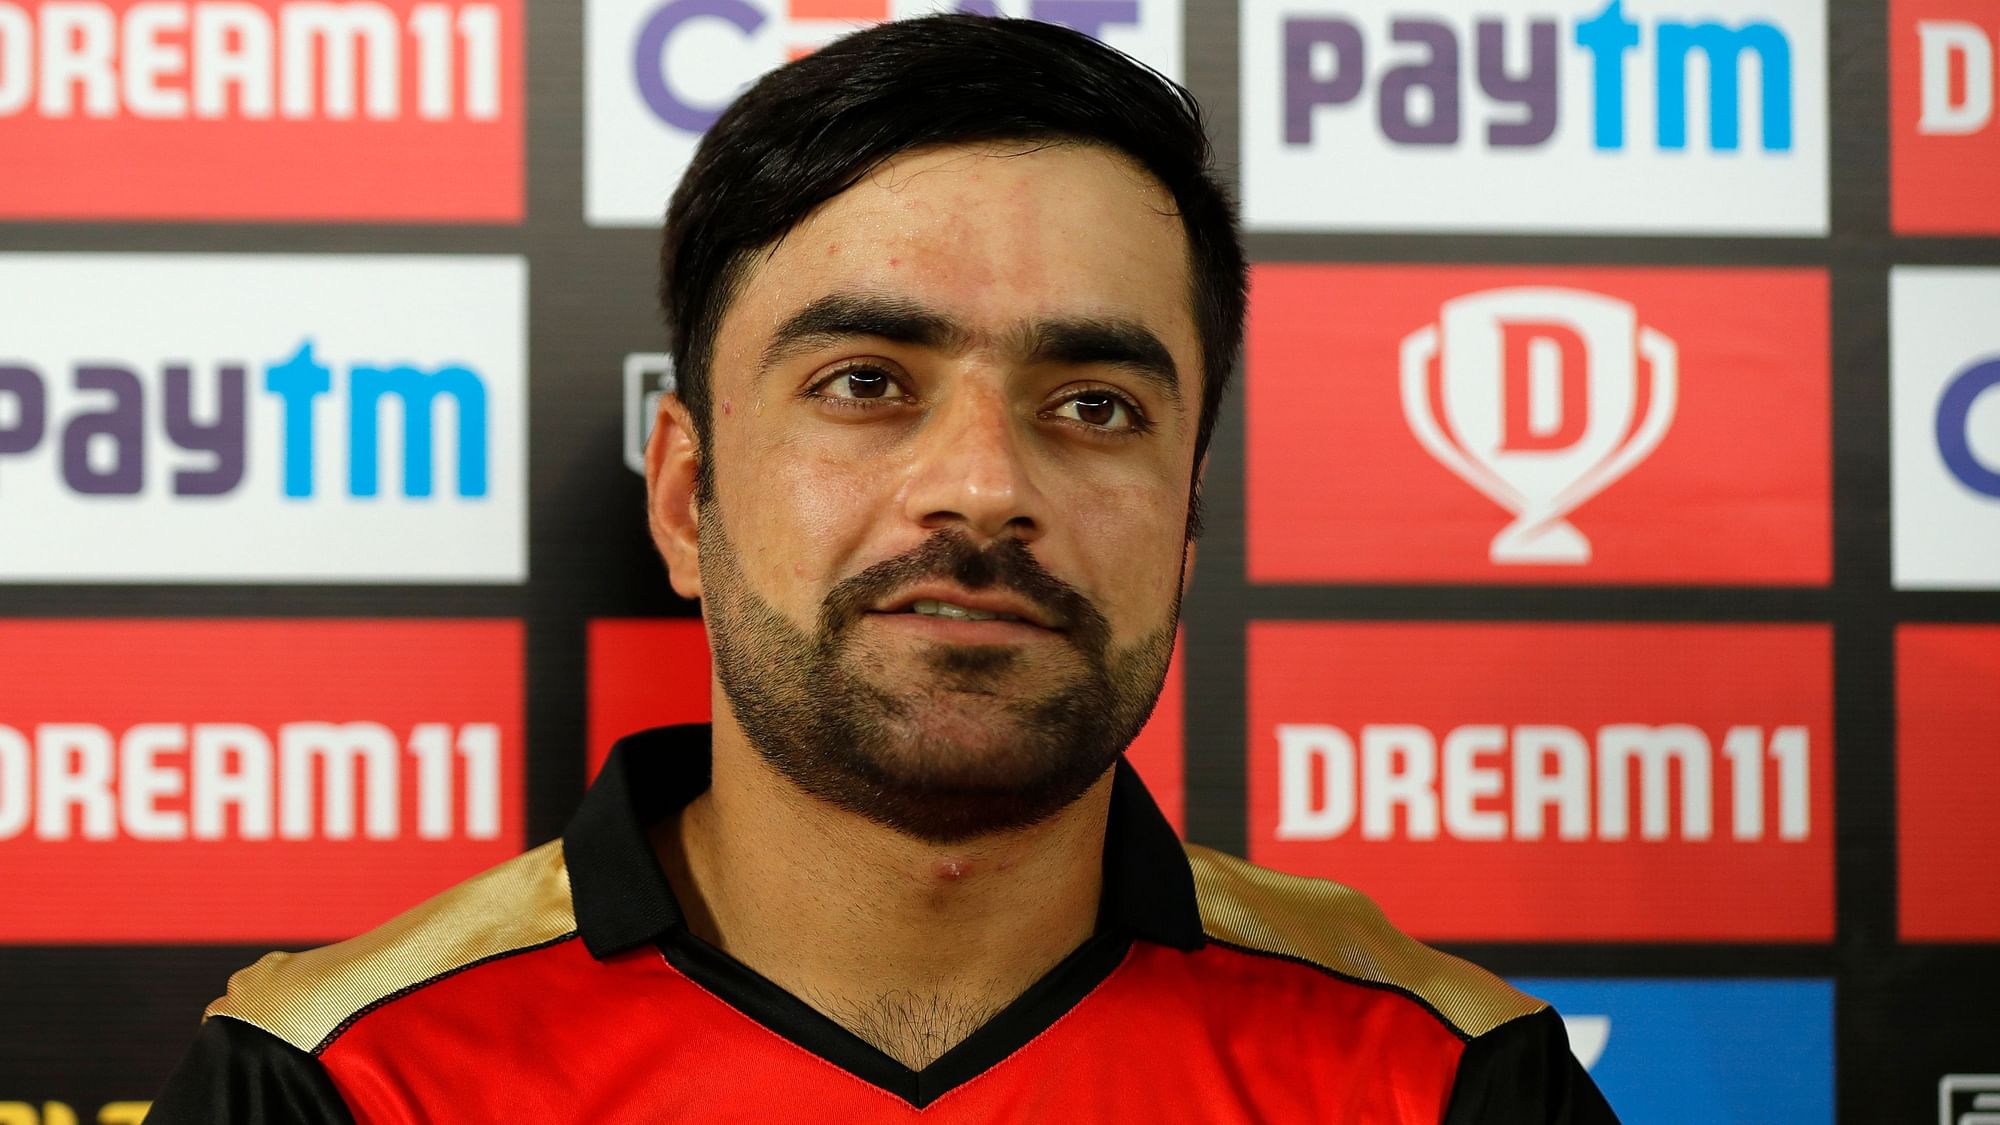 Sunrisers Hyderabad leg-spinner Rashid Khan took three wickets including a double-wicket maiden which also had the big wicket of Nicholas Pooran.